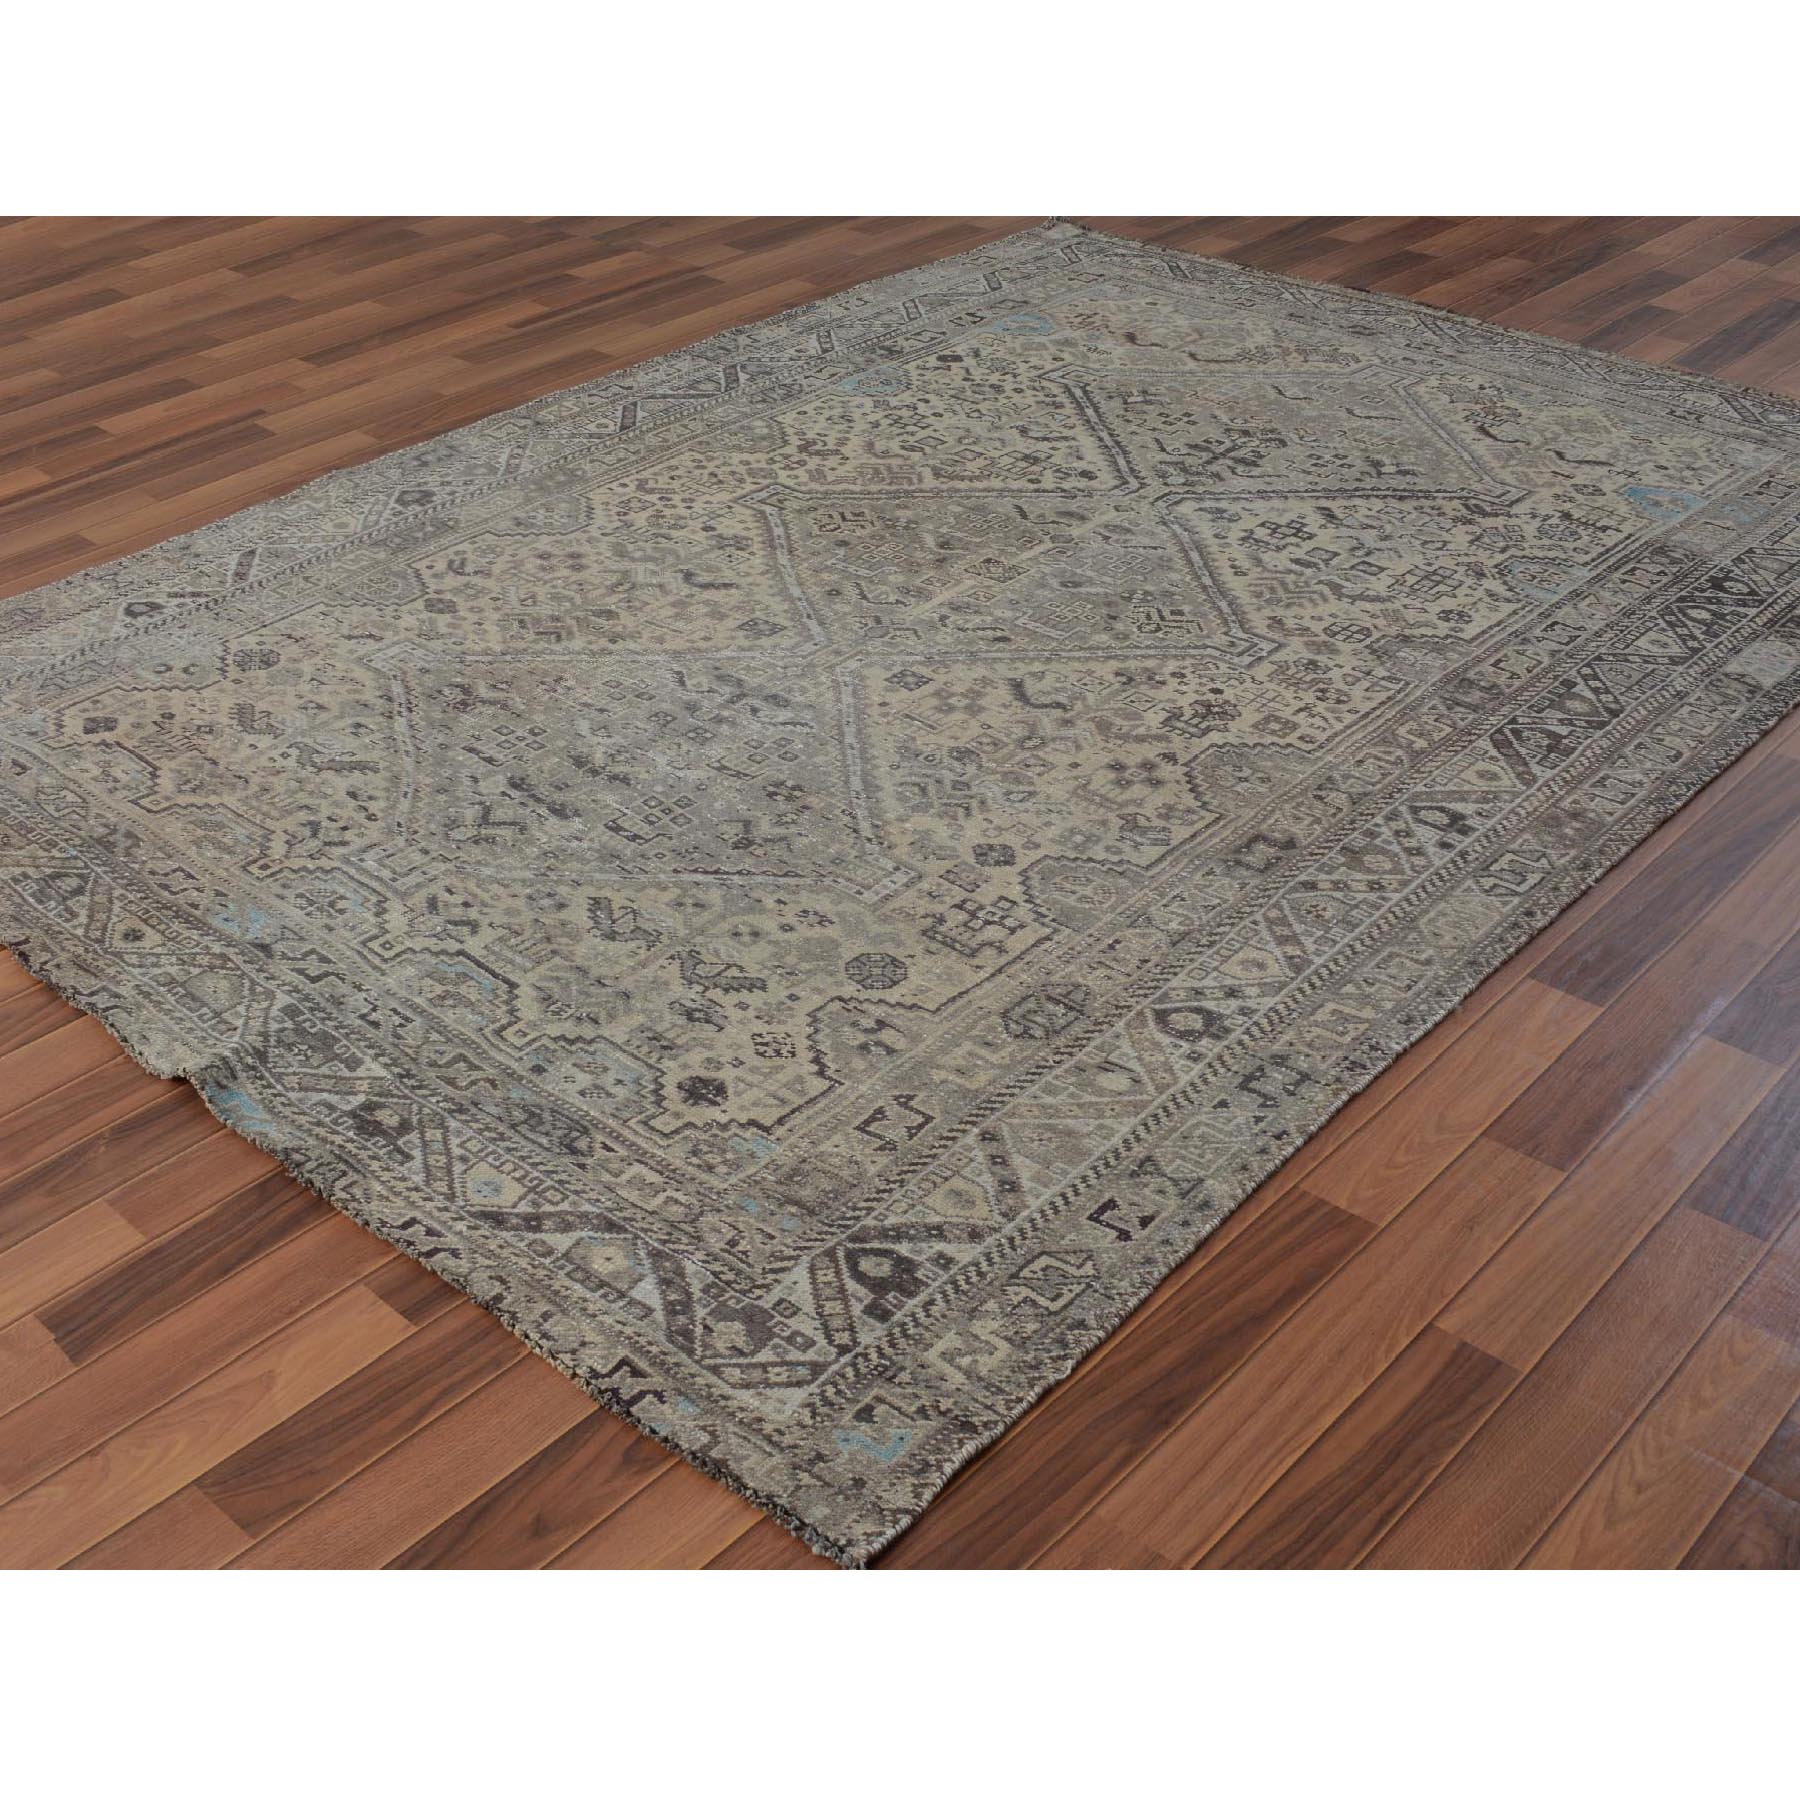 7-1 x9-7  Beige Vintage and Worn Down Persian Qashqai Pure Wool Hand Knotted Oriental Rug 